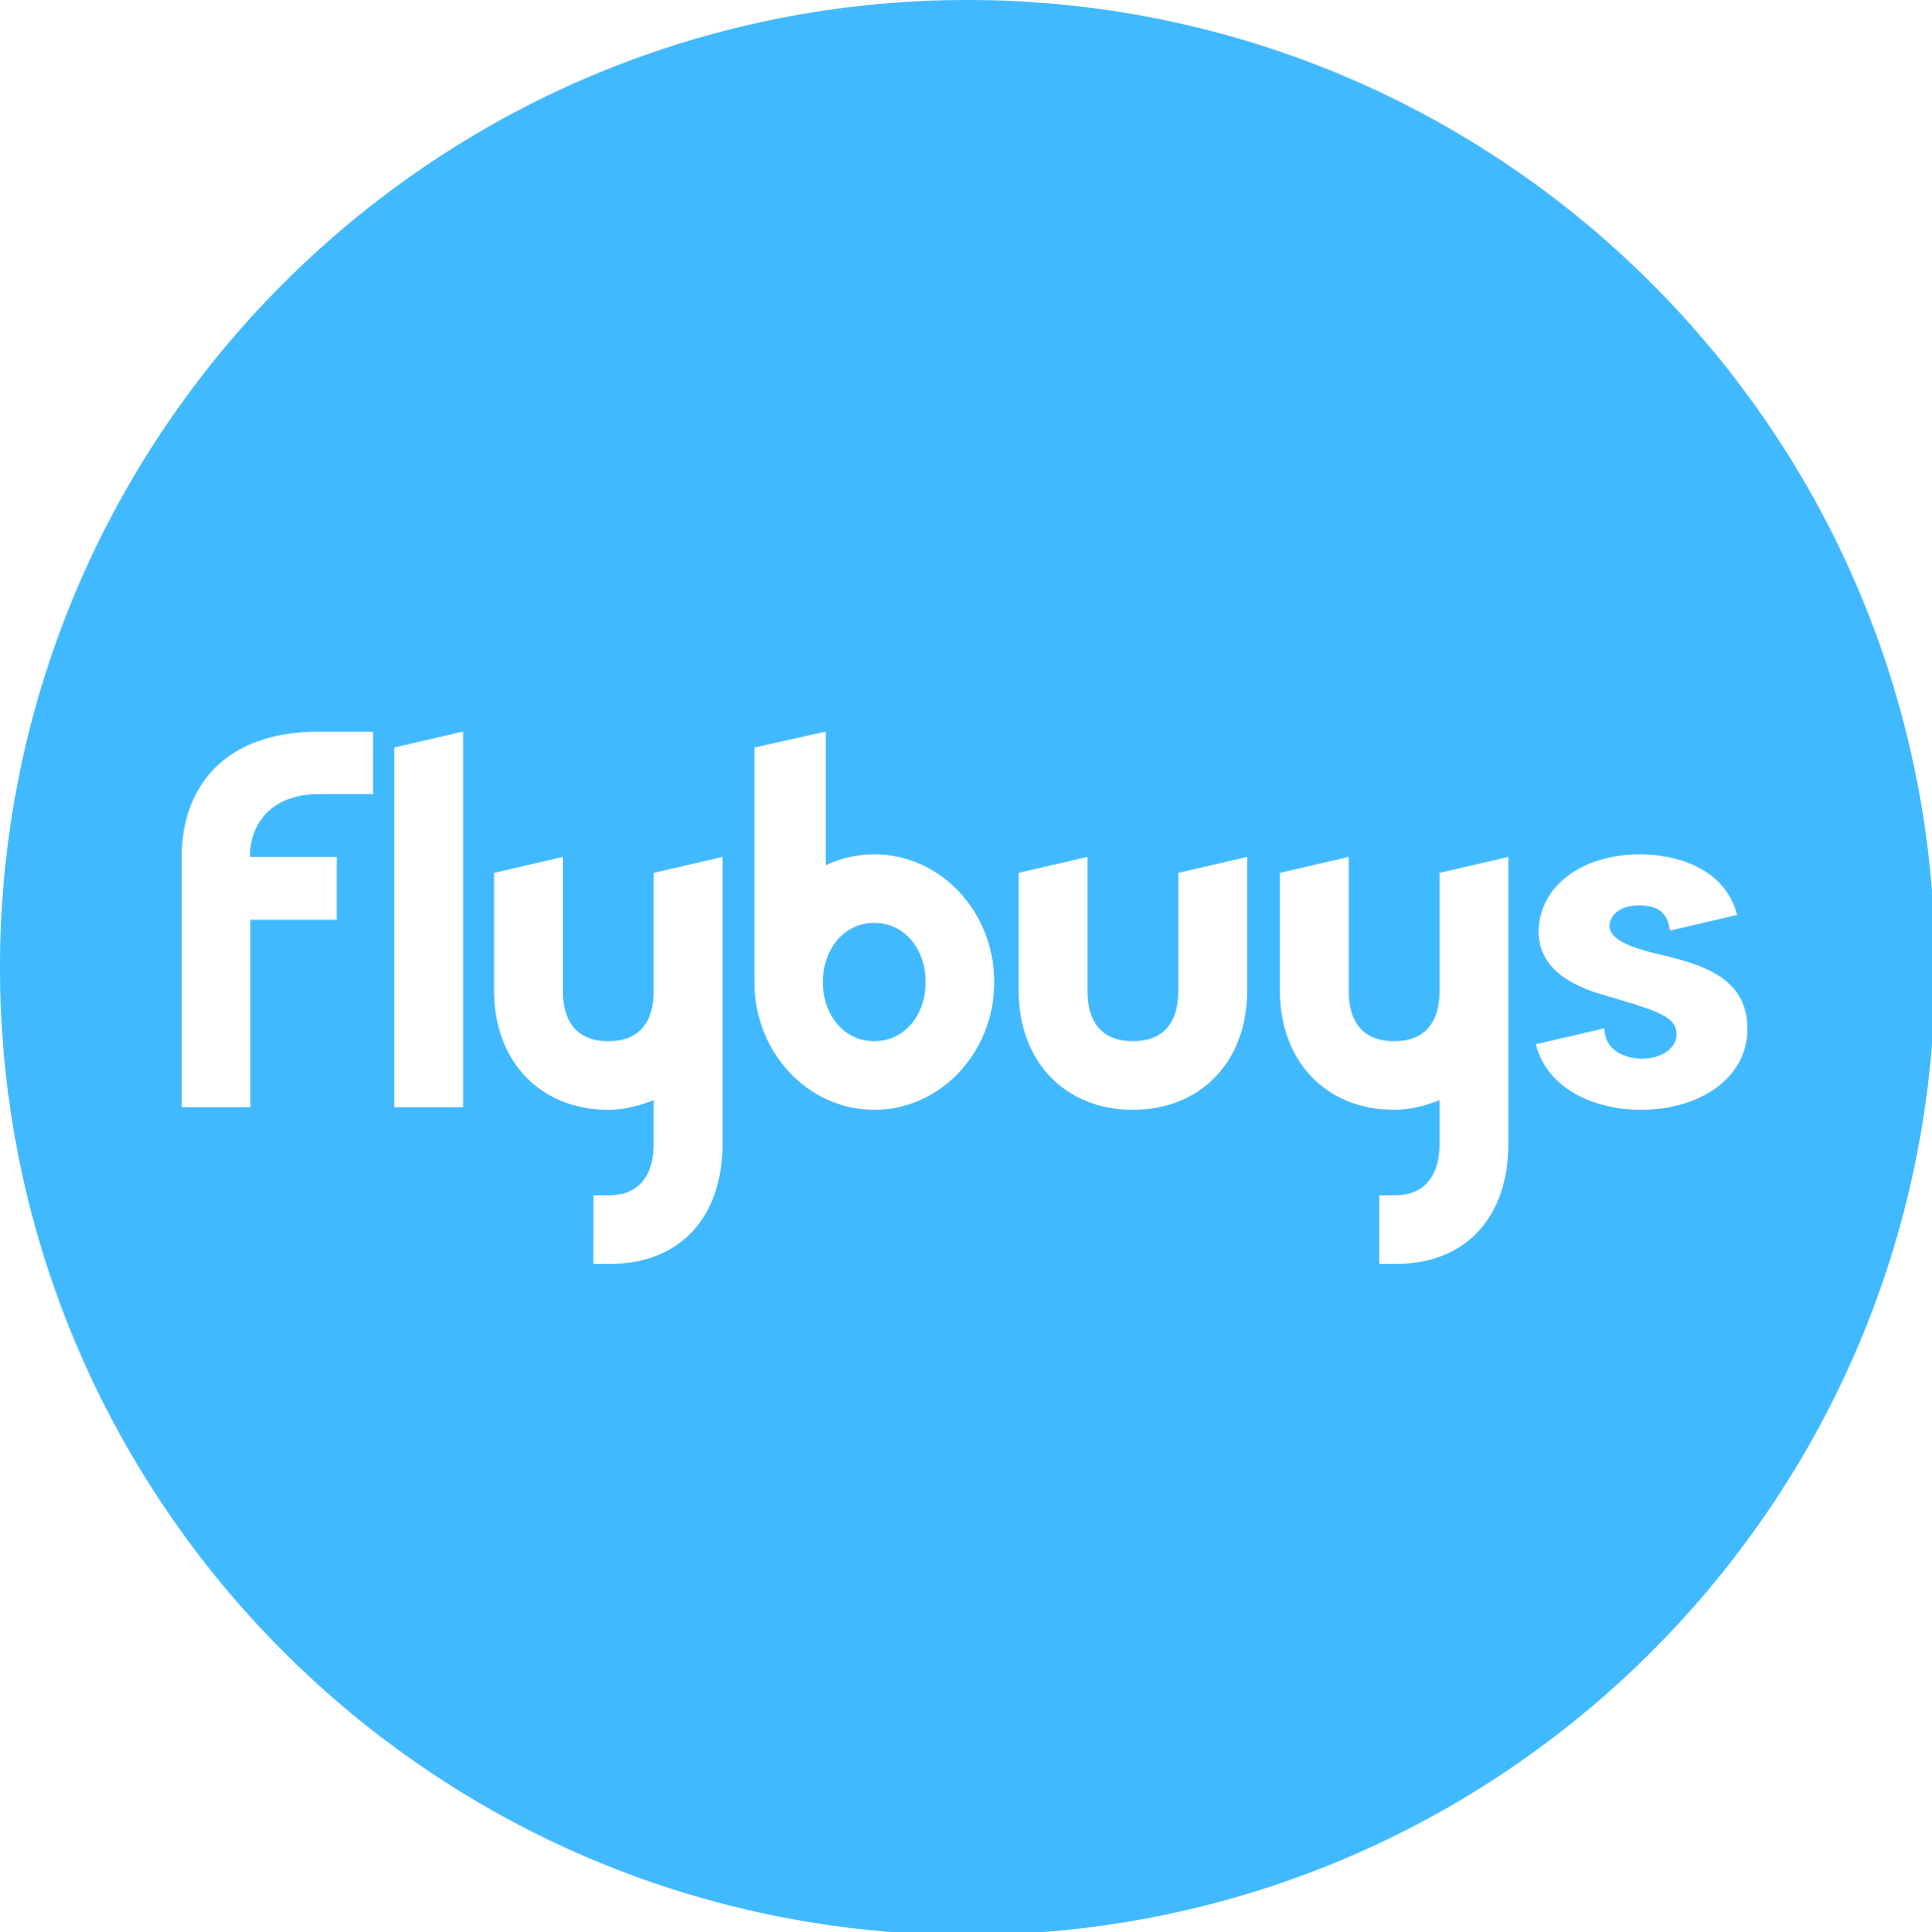 Get 1000 points when you link Flybuys and Velocity accounts